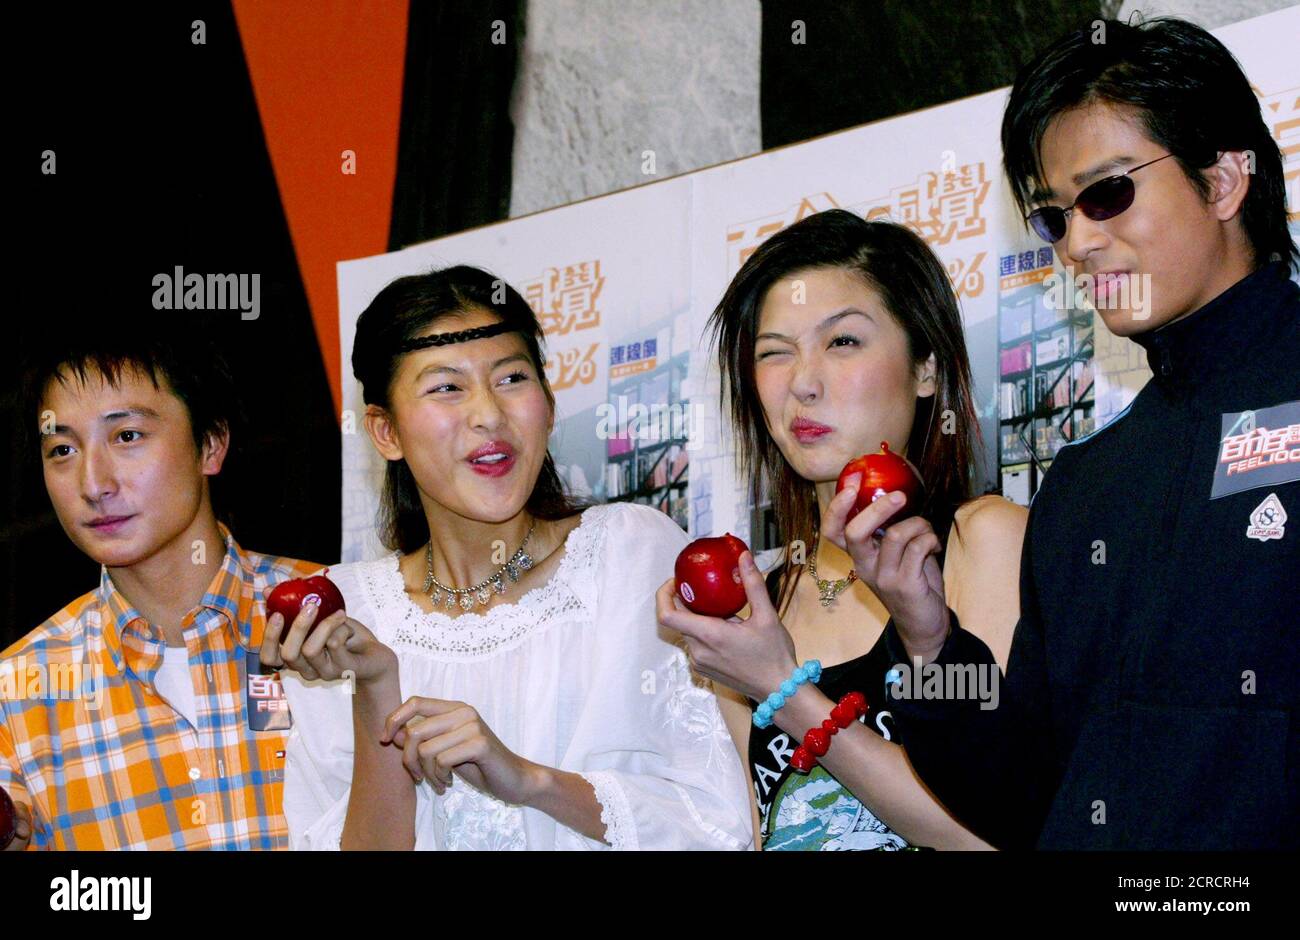 Hong Kong singers, from left to right, Alex Fong, Rain Lee, Niki Chow and  Daniel Chan eat plums during a news conference to promote their new online  drama "Feel 100%" in Hong